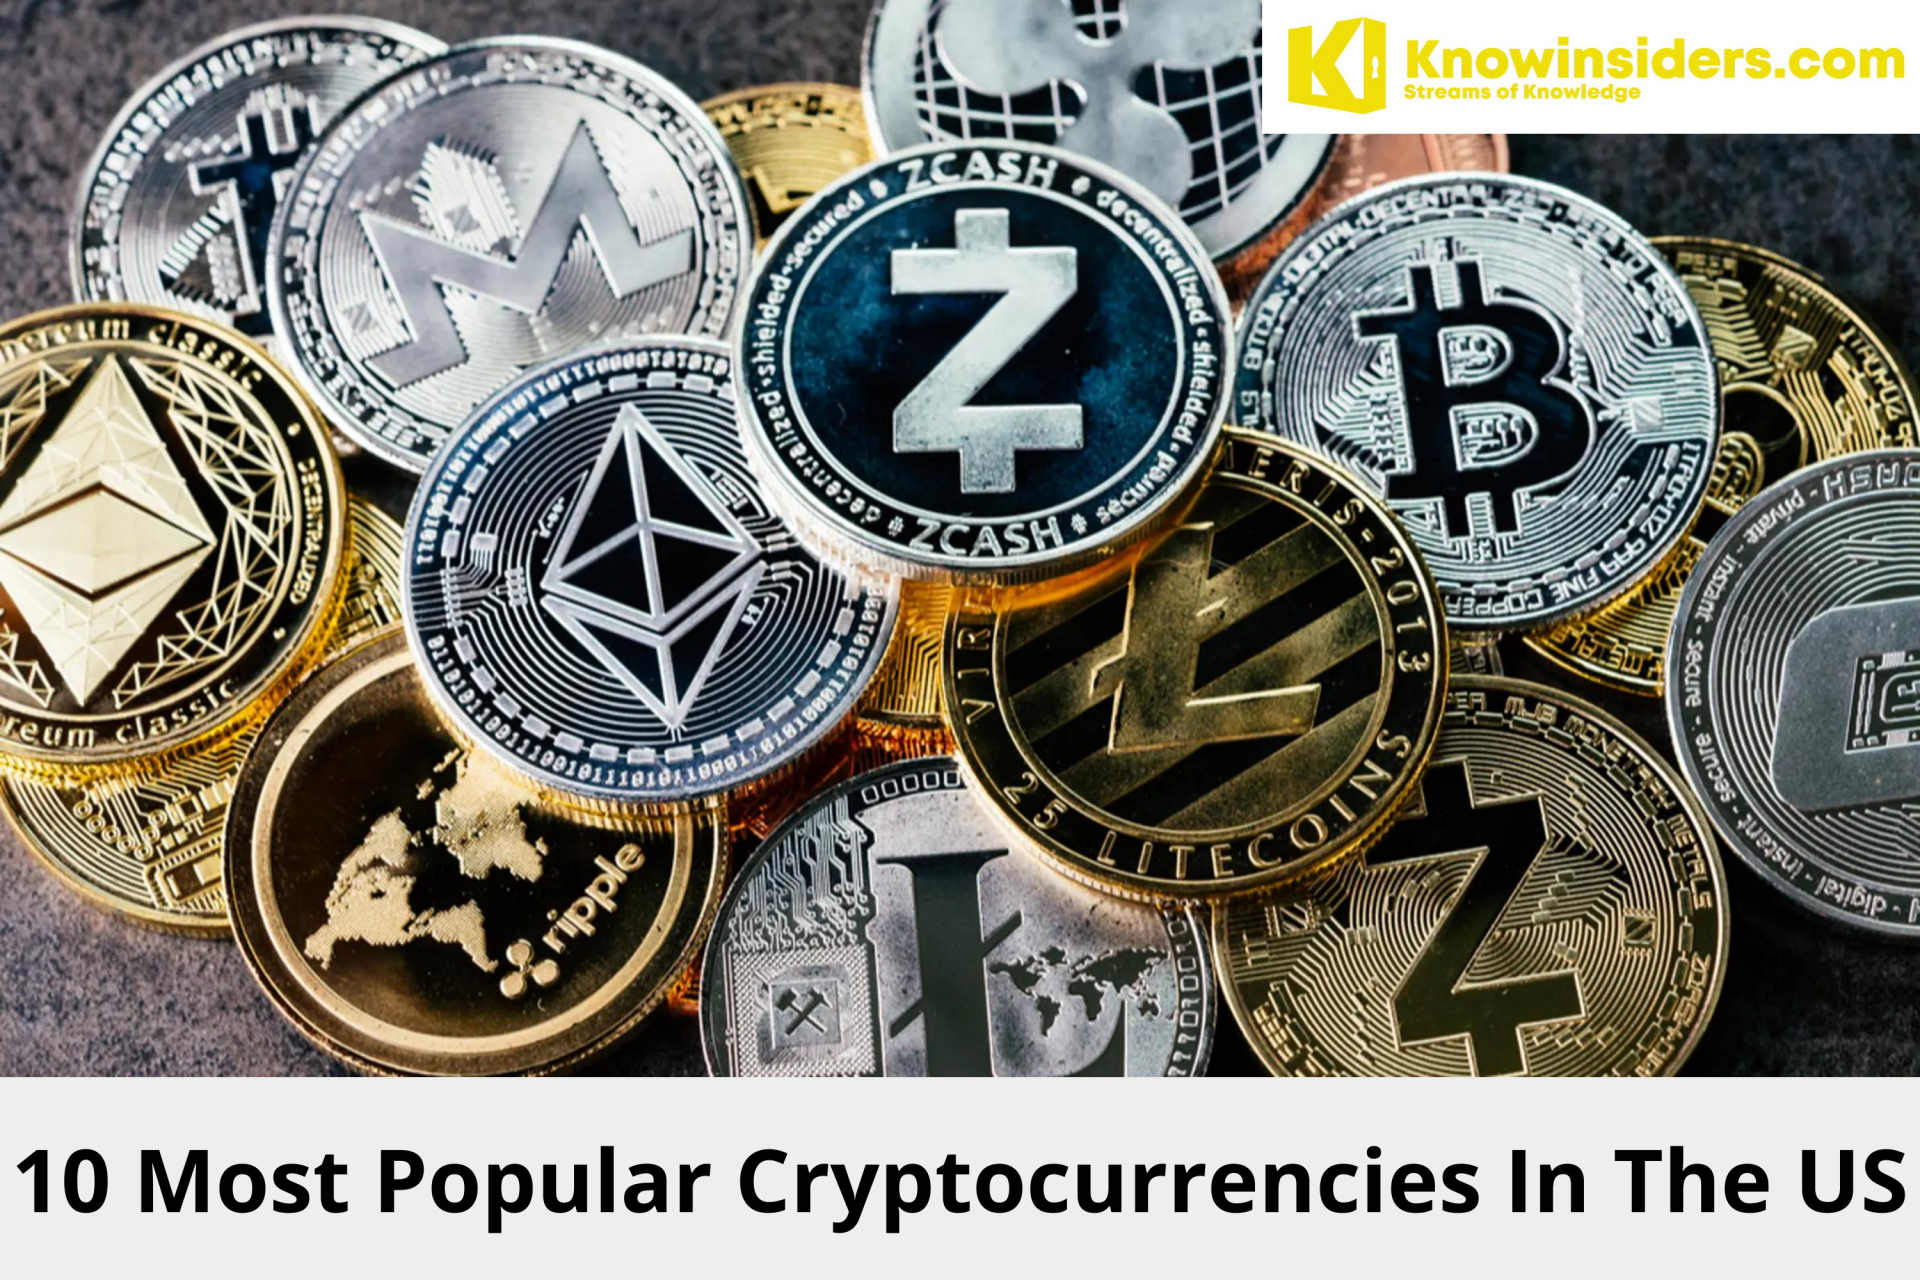 10 Most Popular Cryptocurrencies In The US